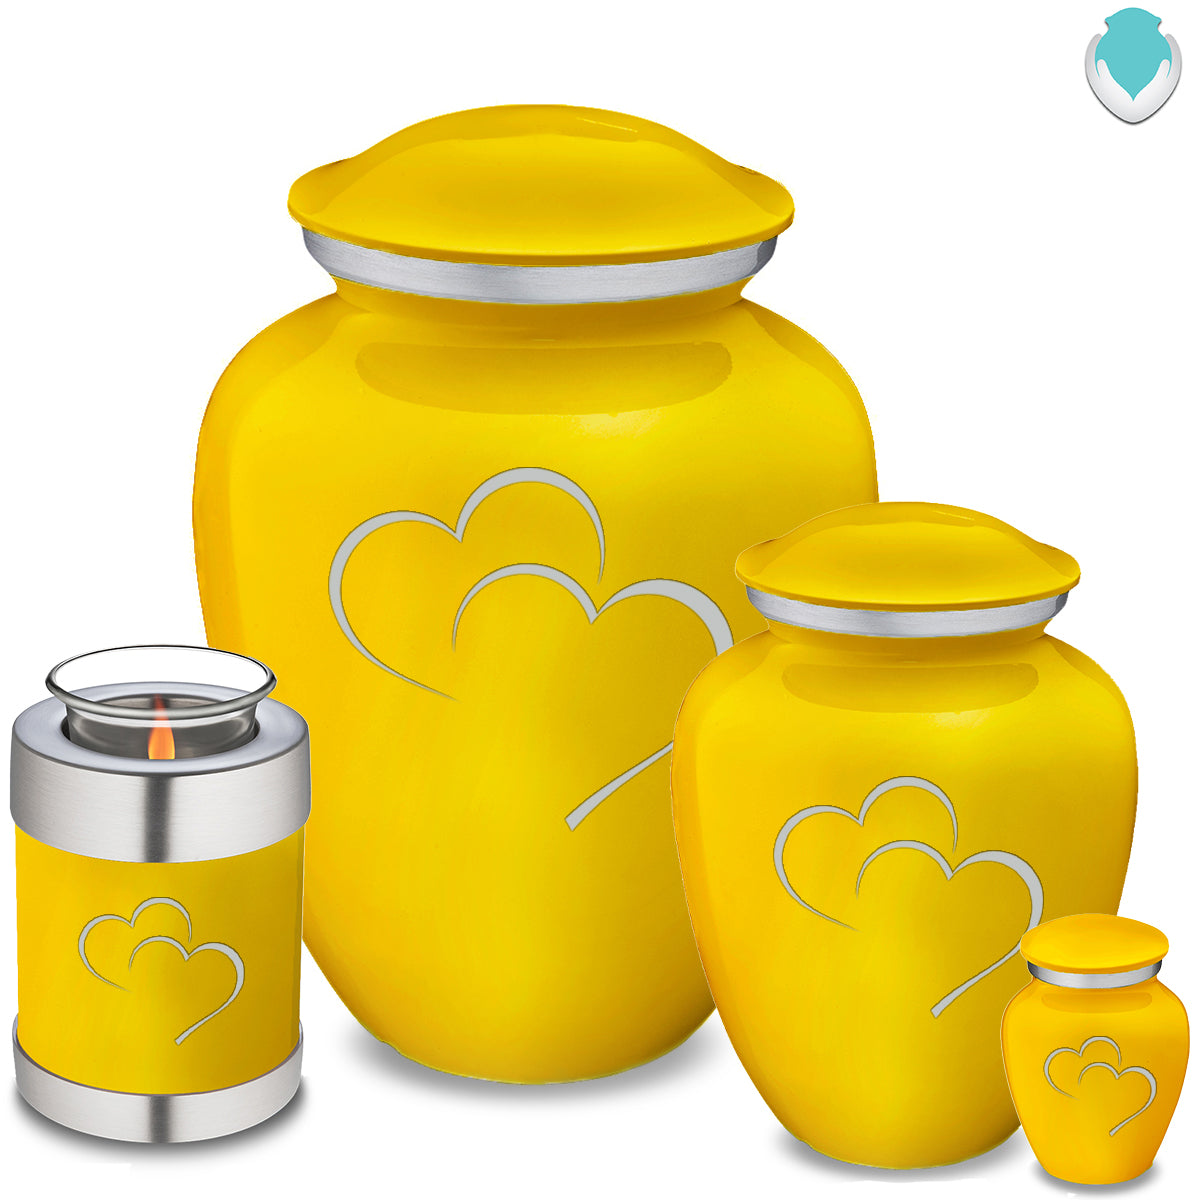 Adult Embrace Yellow Hearts Cremation Urn